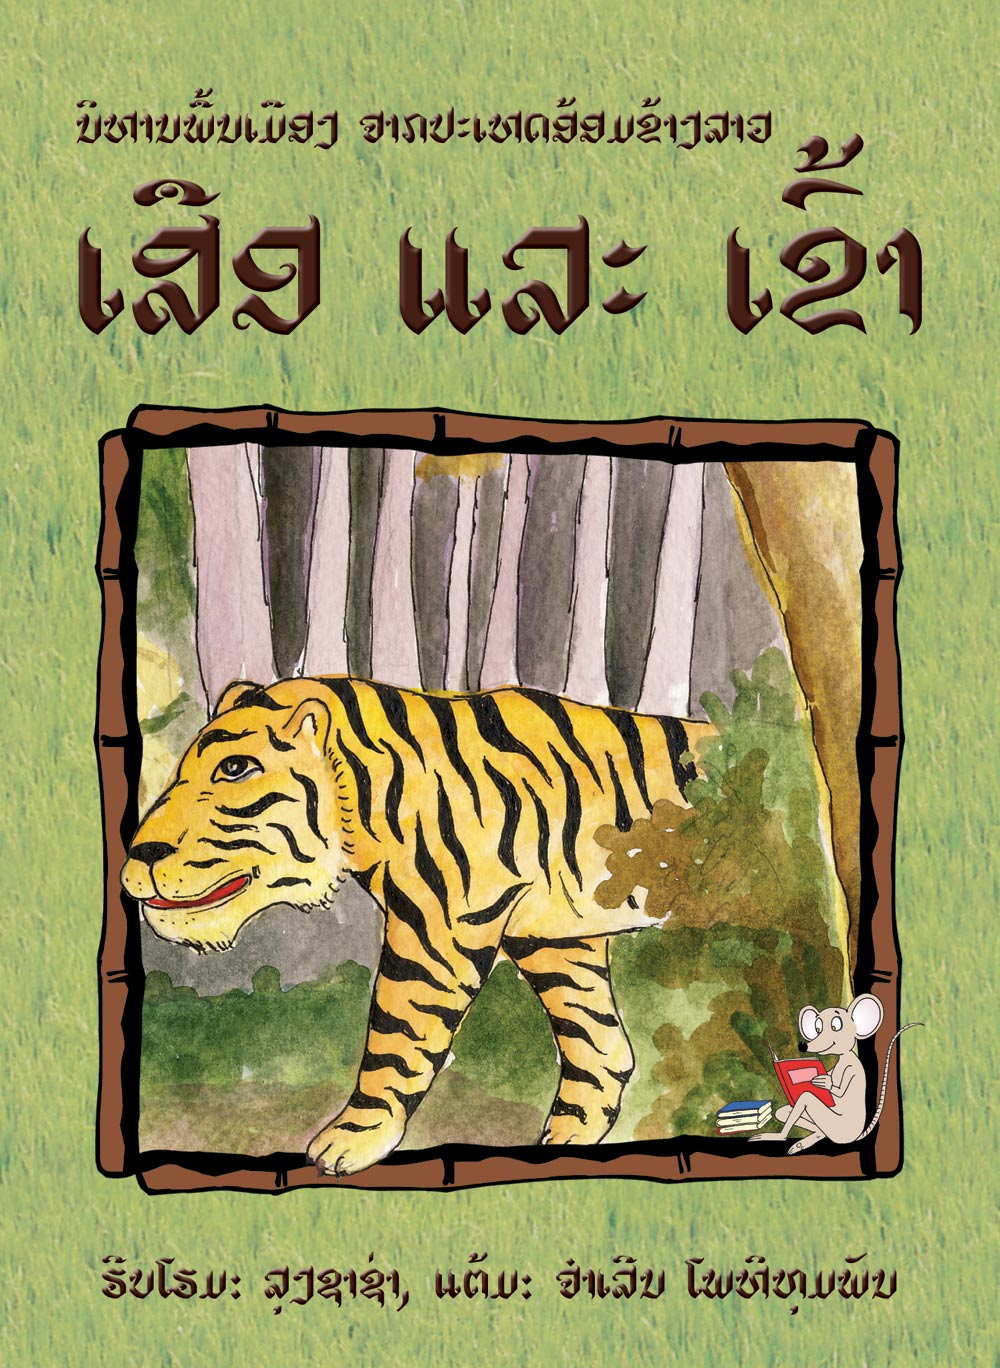 Tigers and Rice large book cover, published in Lao language